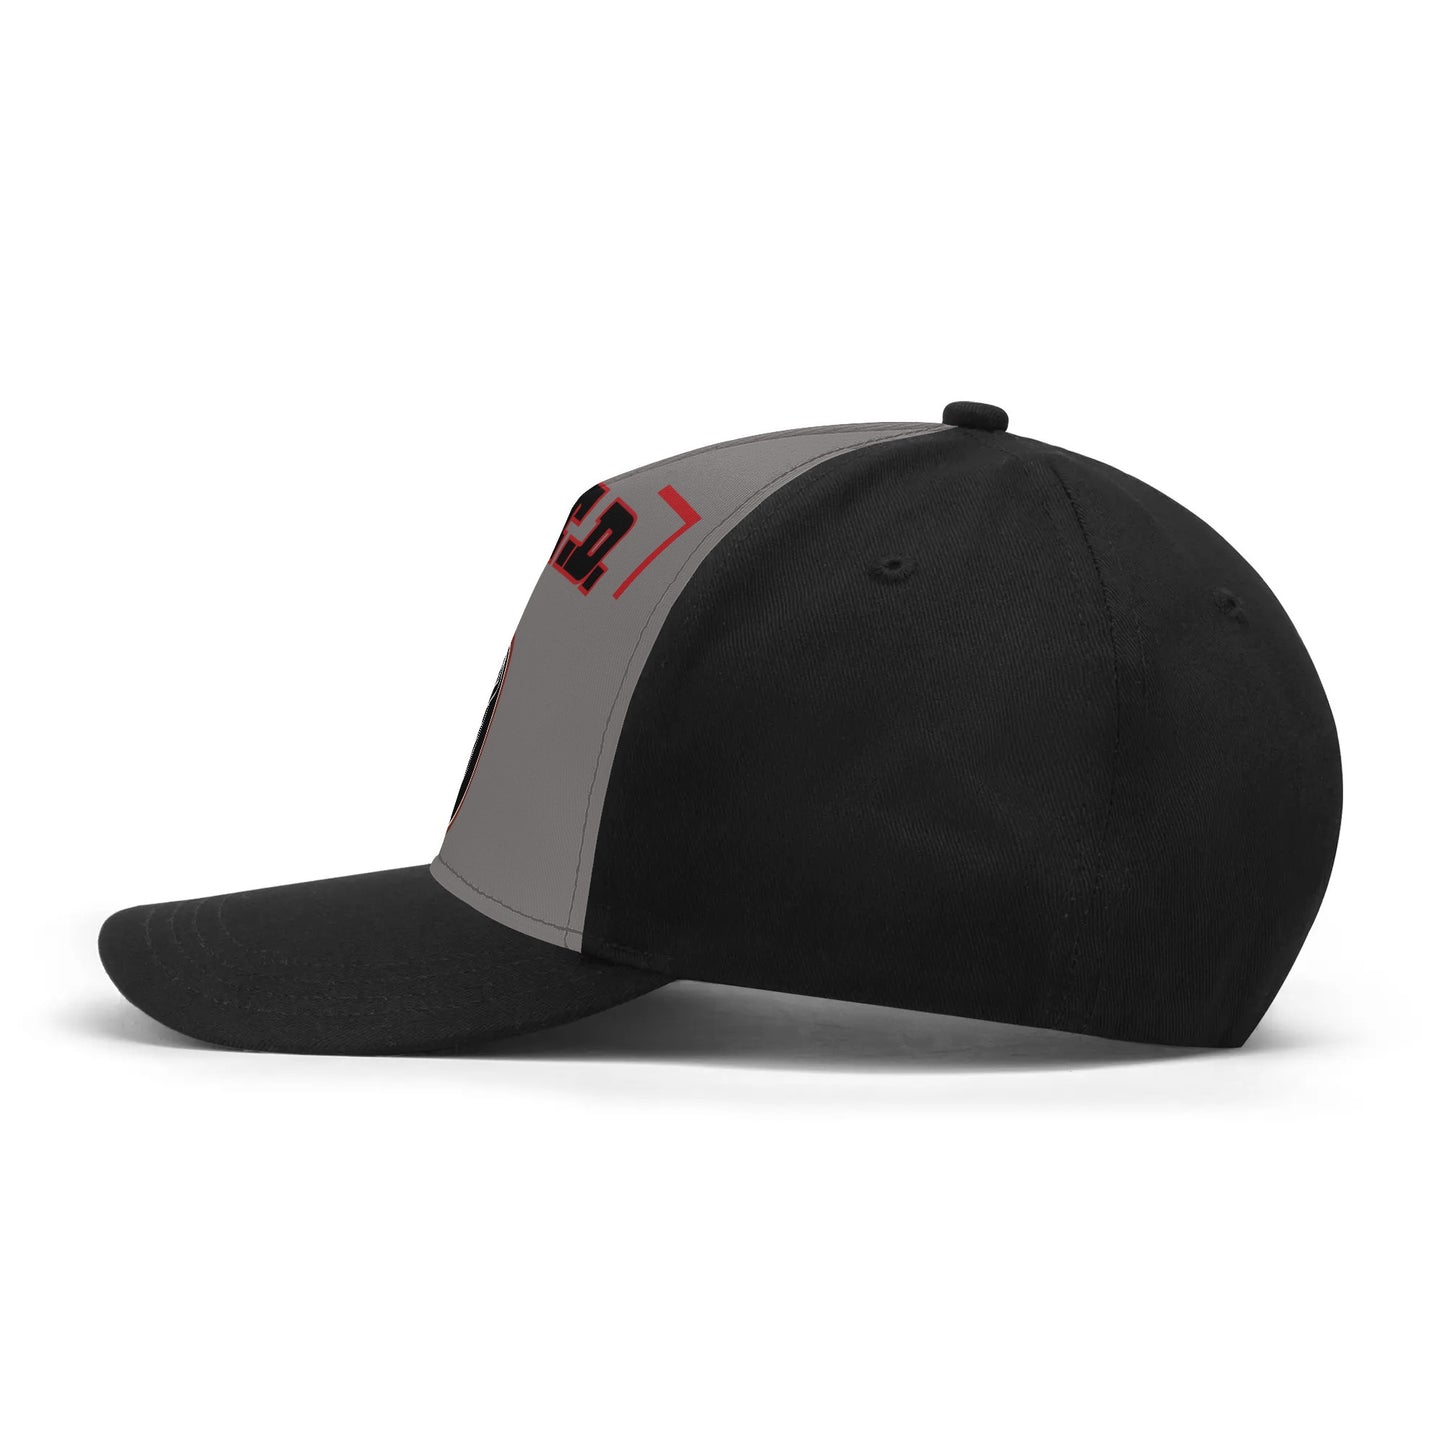 Sons of the Divide- Grey/Red/Black Baseball Cap